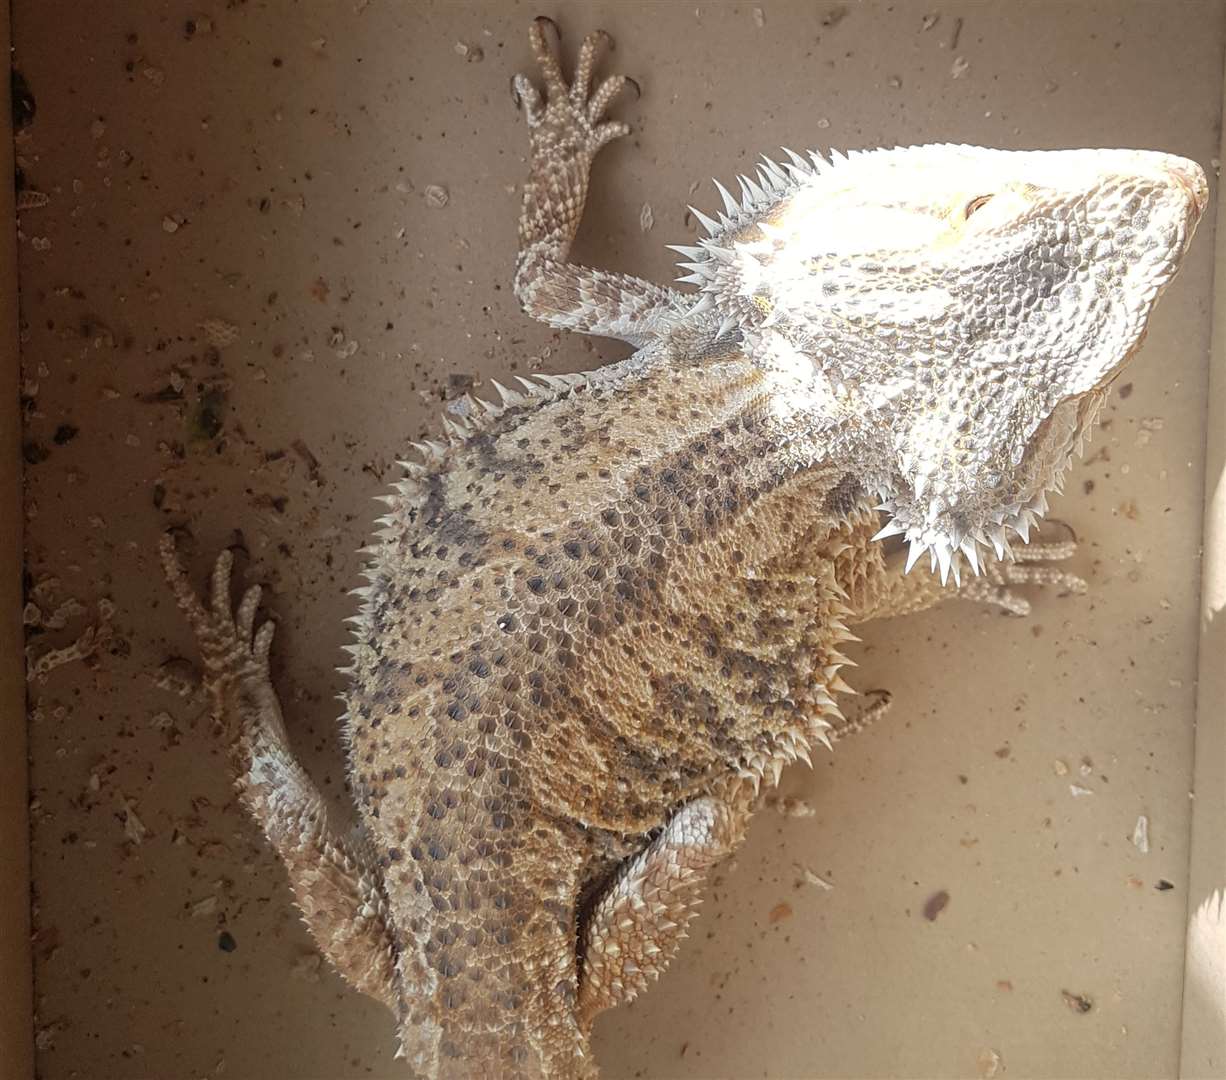 This bearded dragon was found abandoned among the rubbish in Sittingbourne